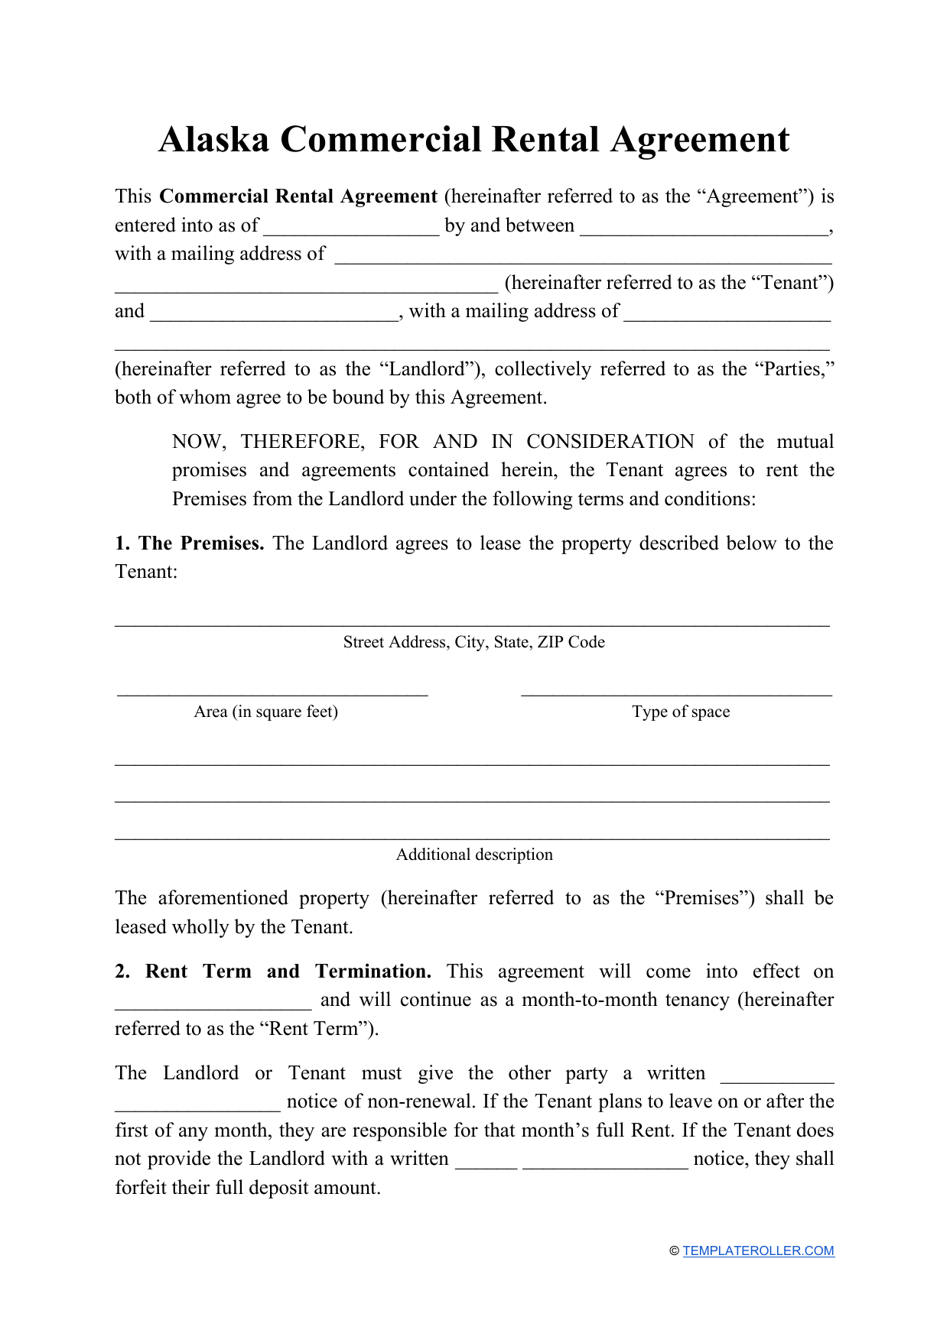 Commercial Rental Agreement Template - Alaska, Page 1